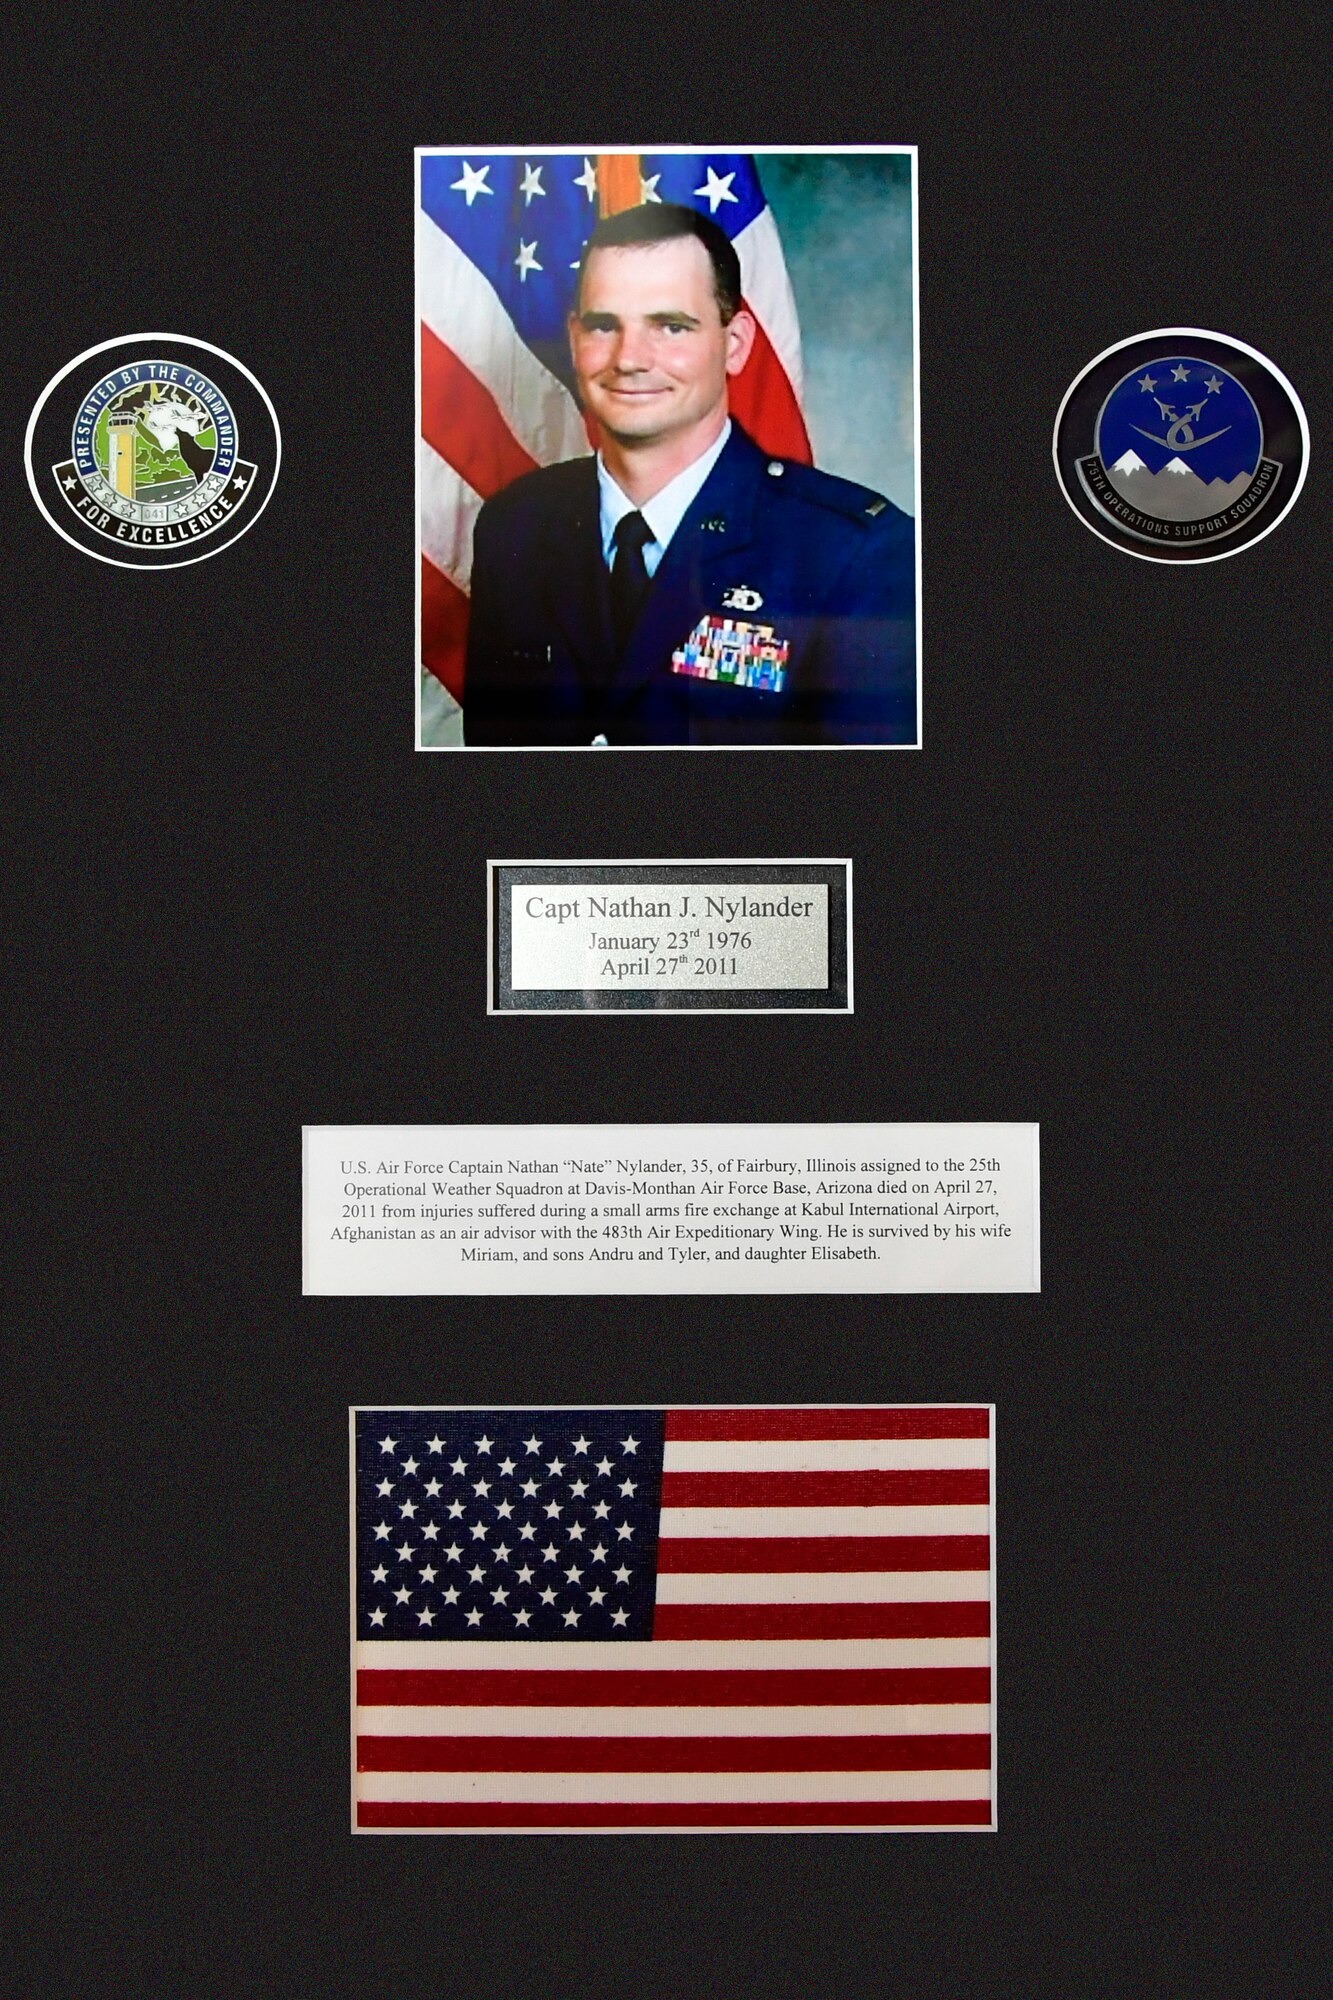 A memorial plaque for Capt. Nathan “Nate” Nylander March 3, 2021, Hill Air Force Base, Utah. The tribute to Nylander who lost his life in the service of our country while giving aid to fellow injured service members during the War in Afghanistan will be displayed in the 75th Operations Support Squadron Heritage Room. (U.S. Air Force photo by Todd Cromar)